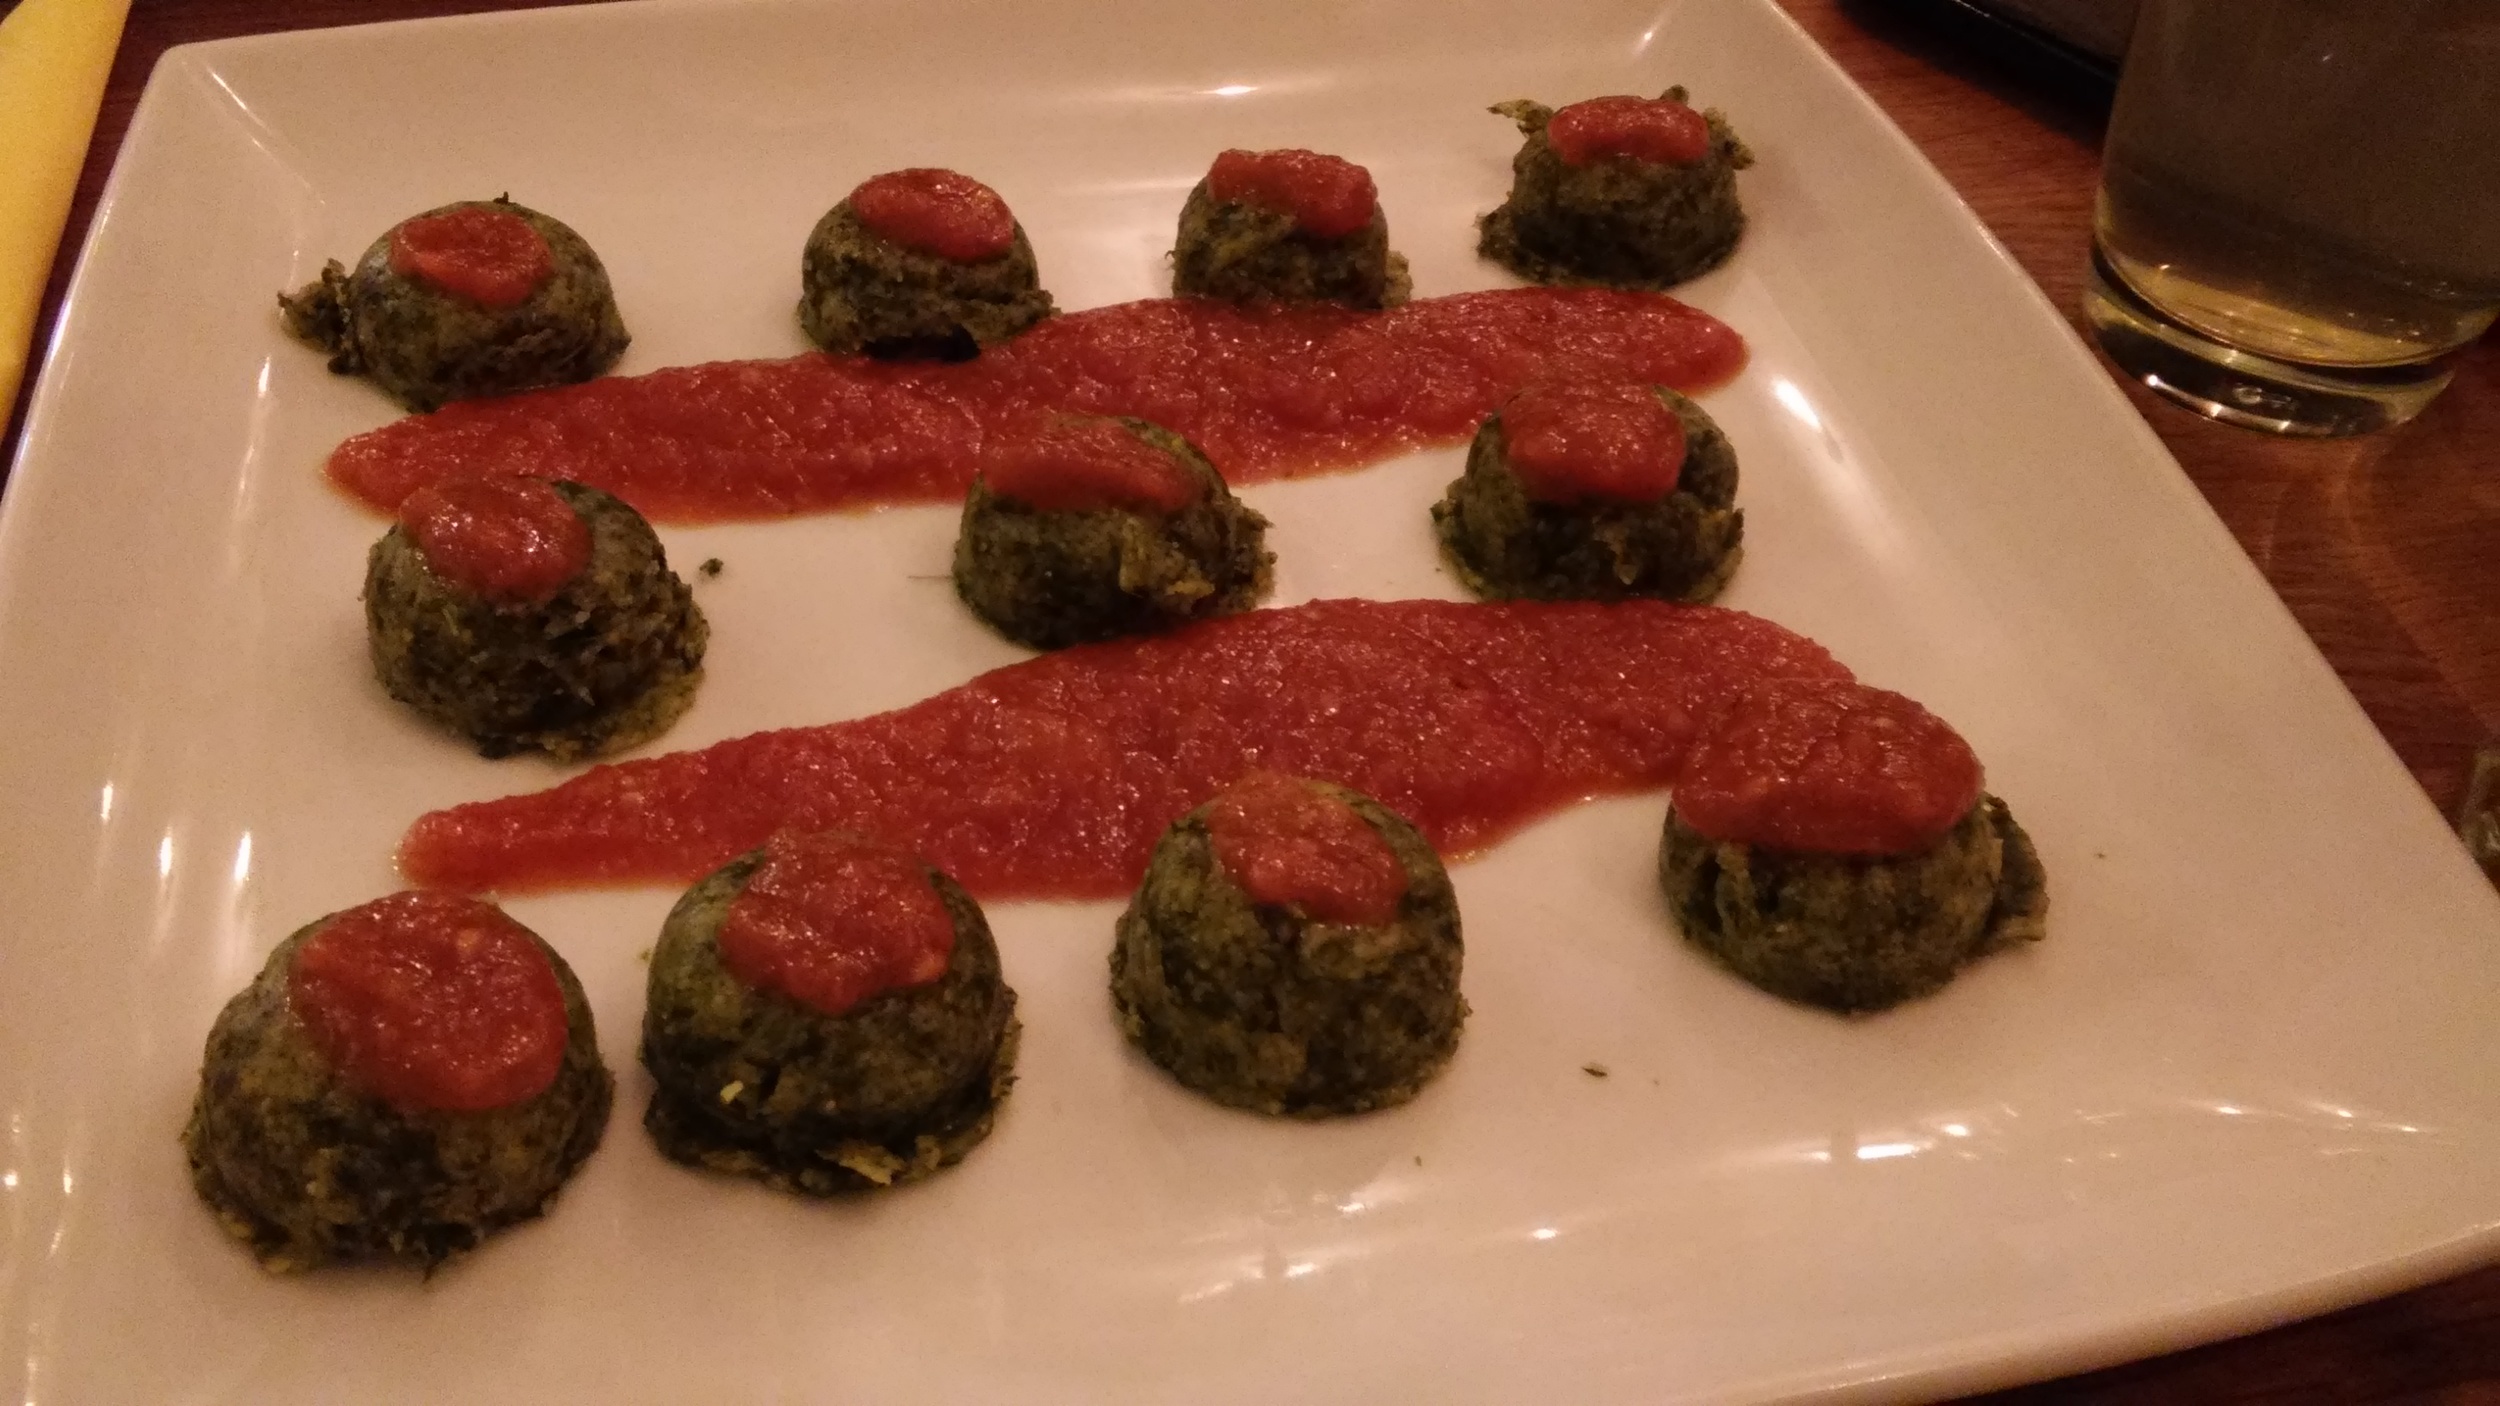 Polenta gnocchi with spinach and tomato sauce